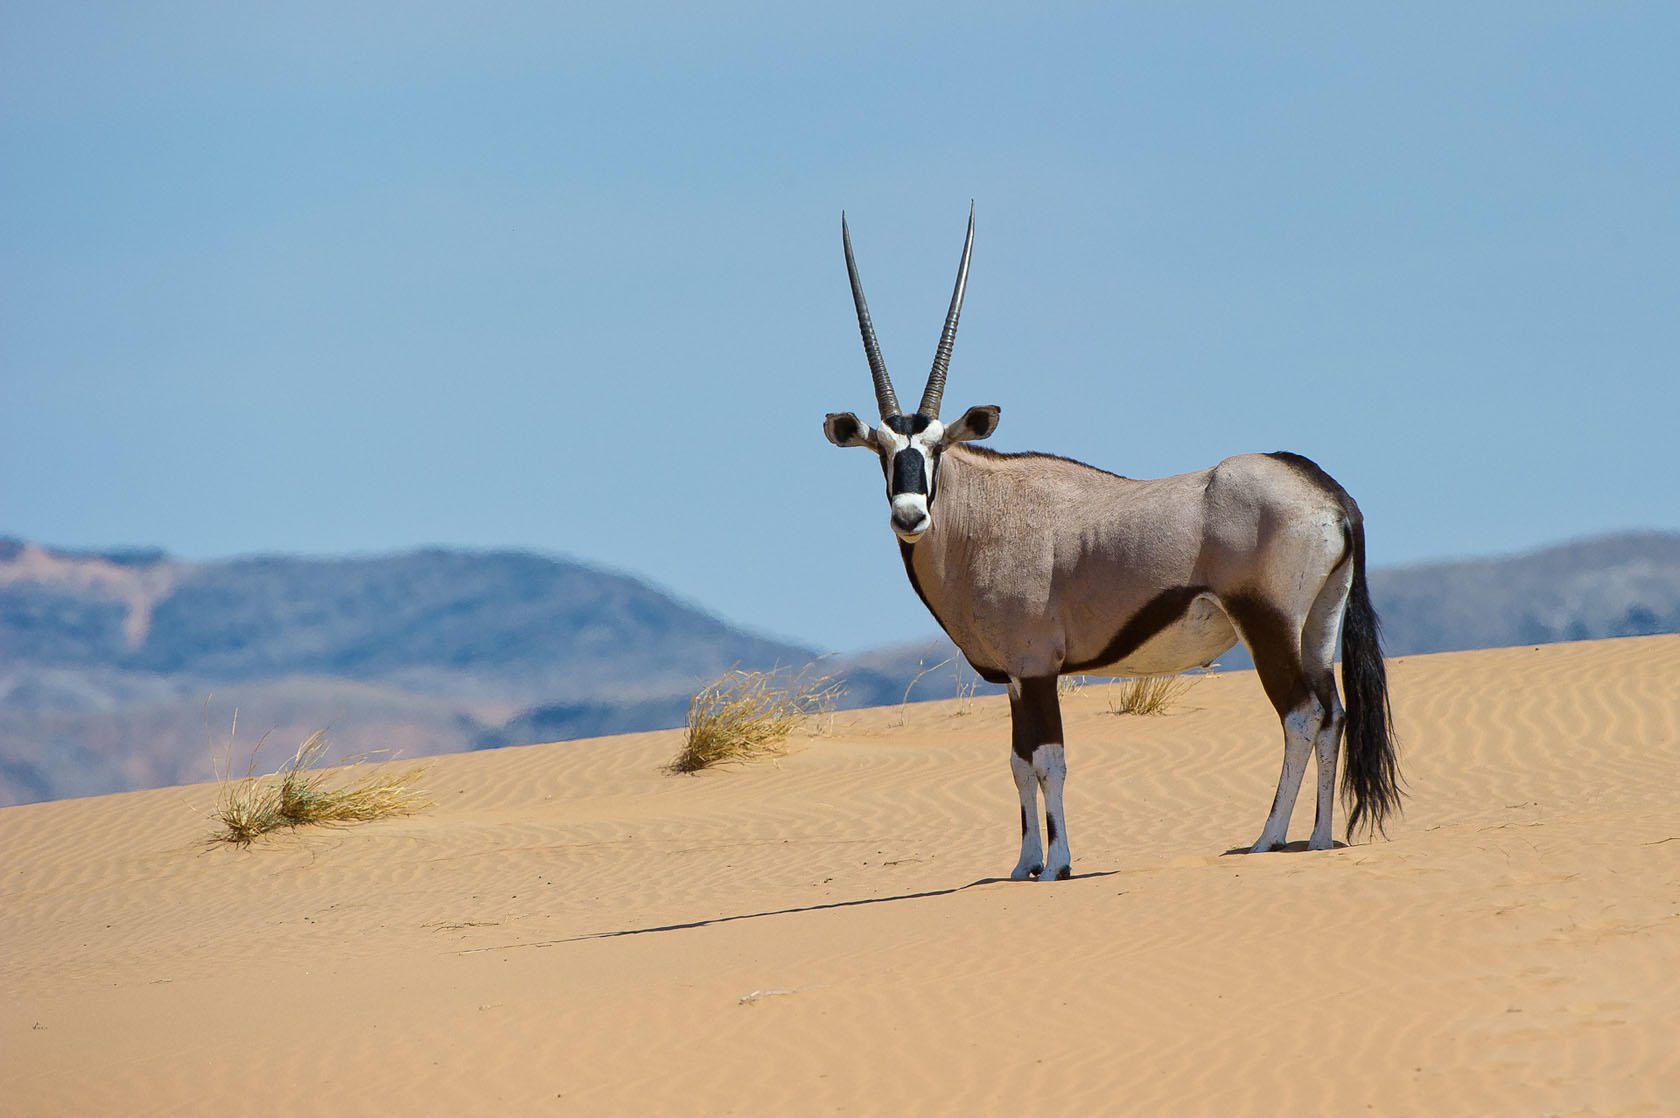 An antelope standing in the middle of a desert.